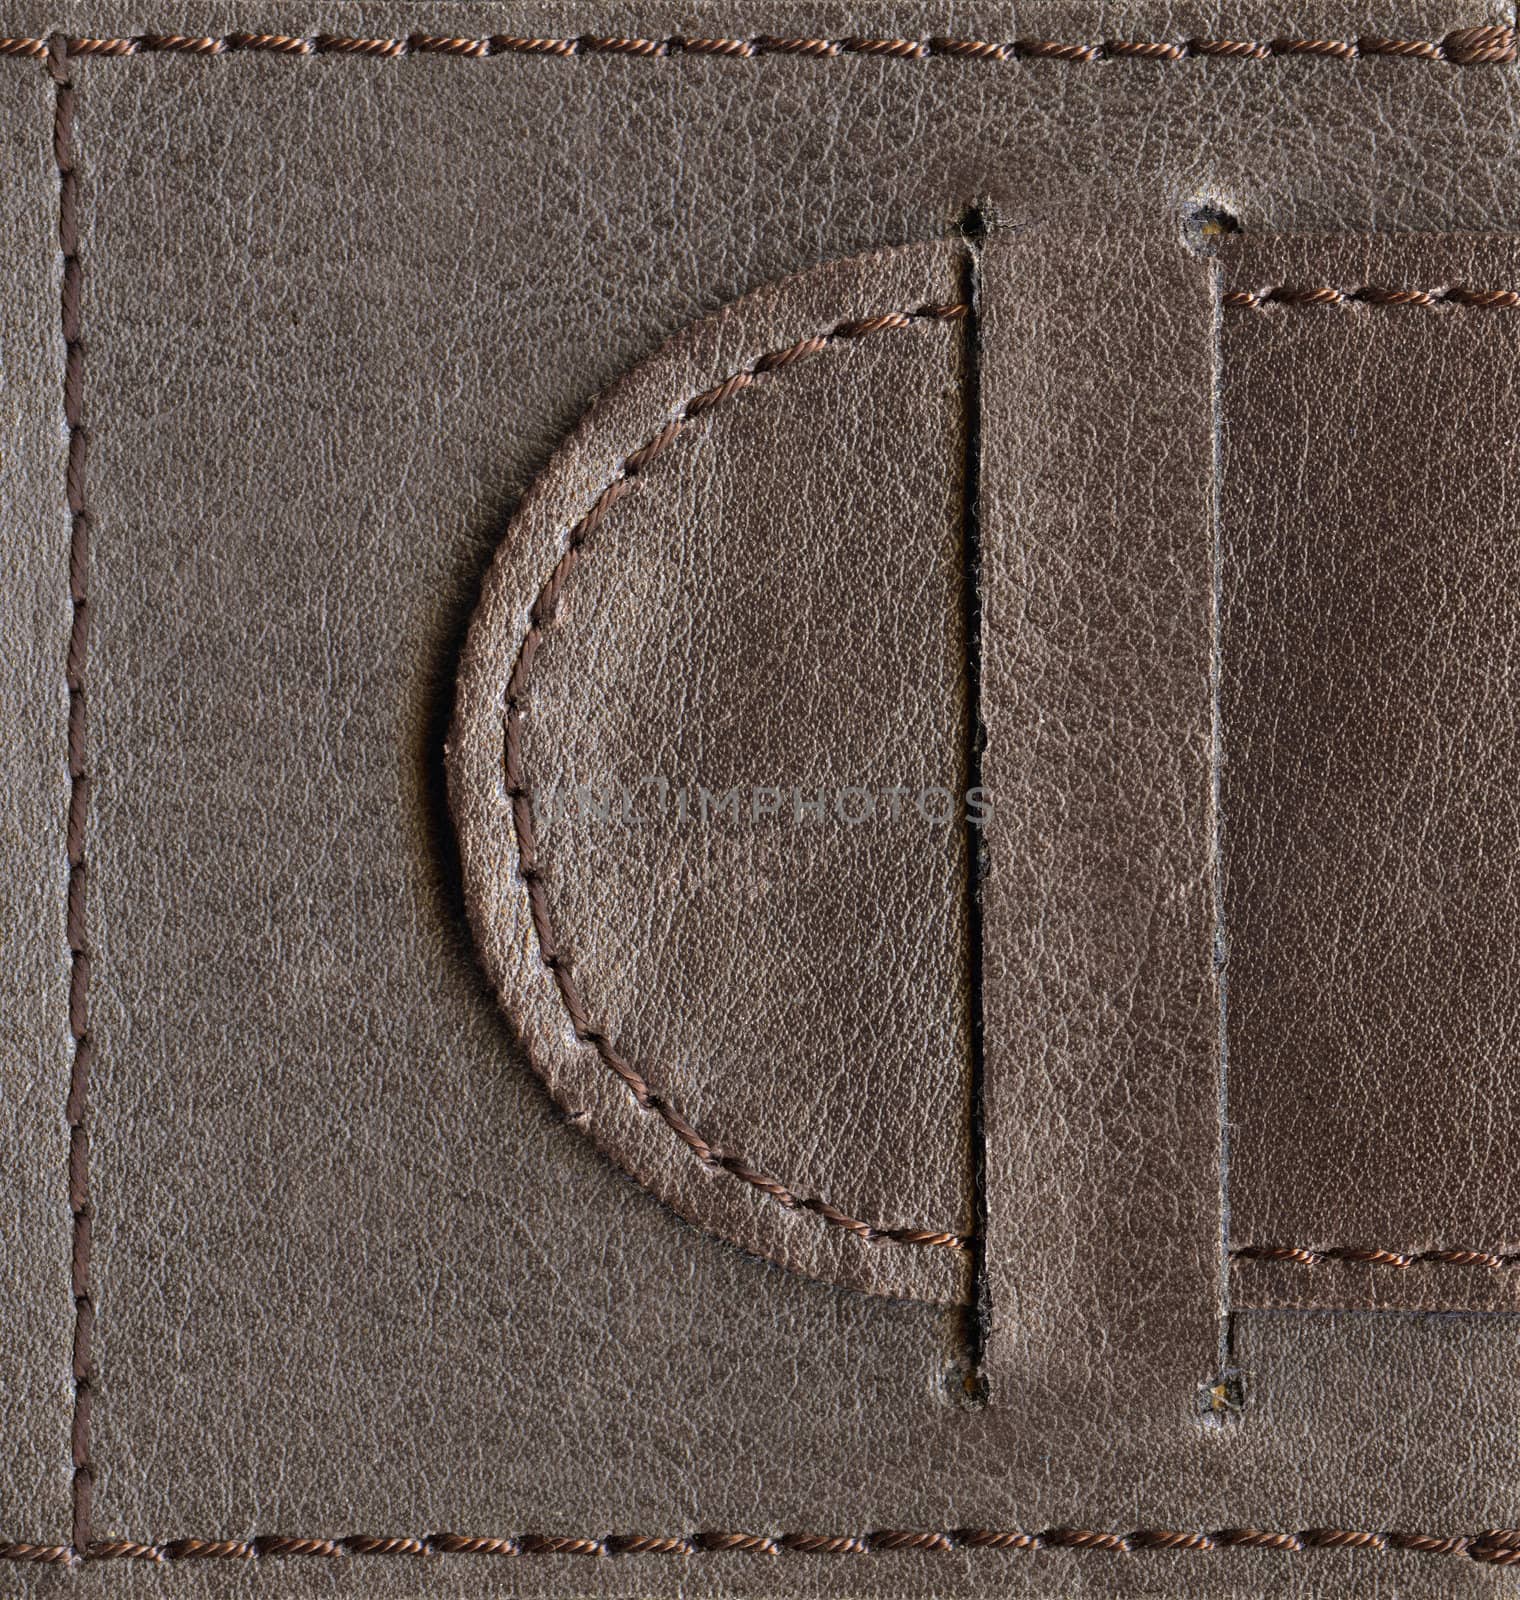 brown textured leather lock, belt stitched by thread over edges, high-resolution scan